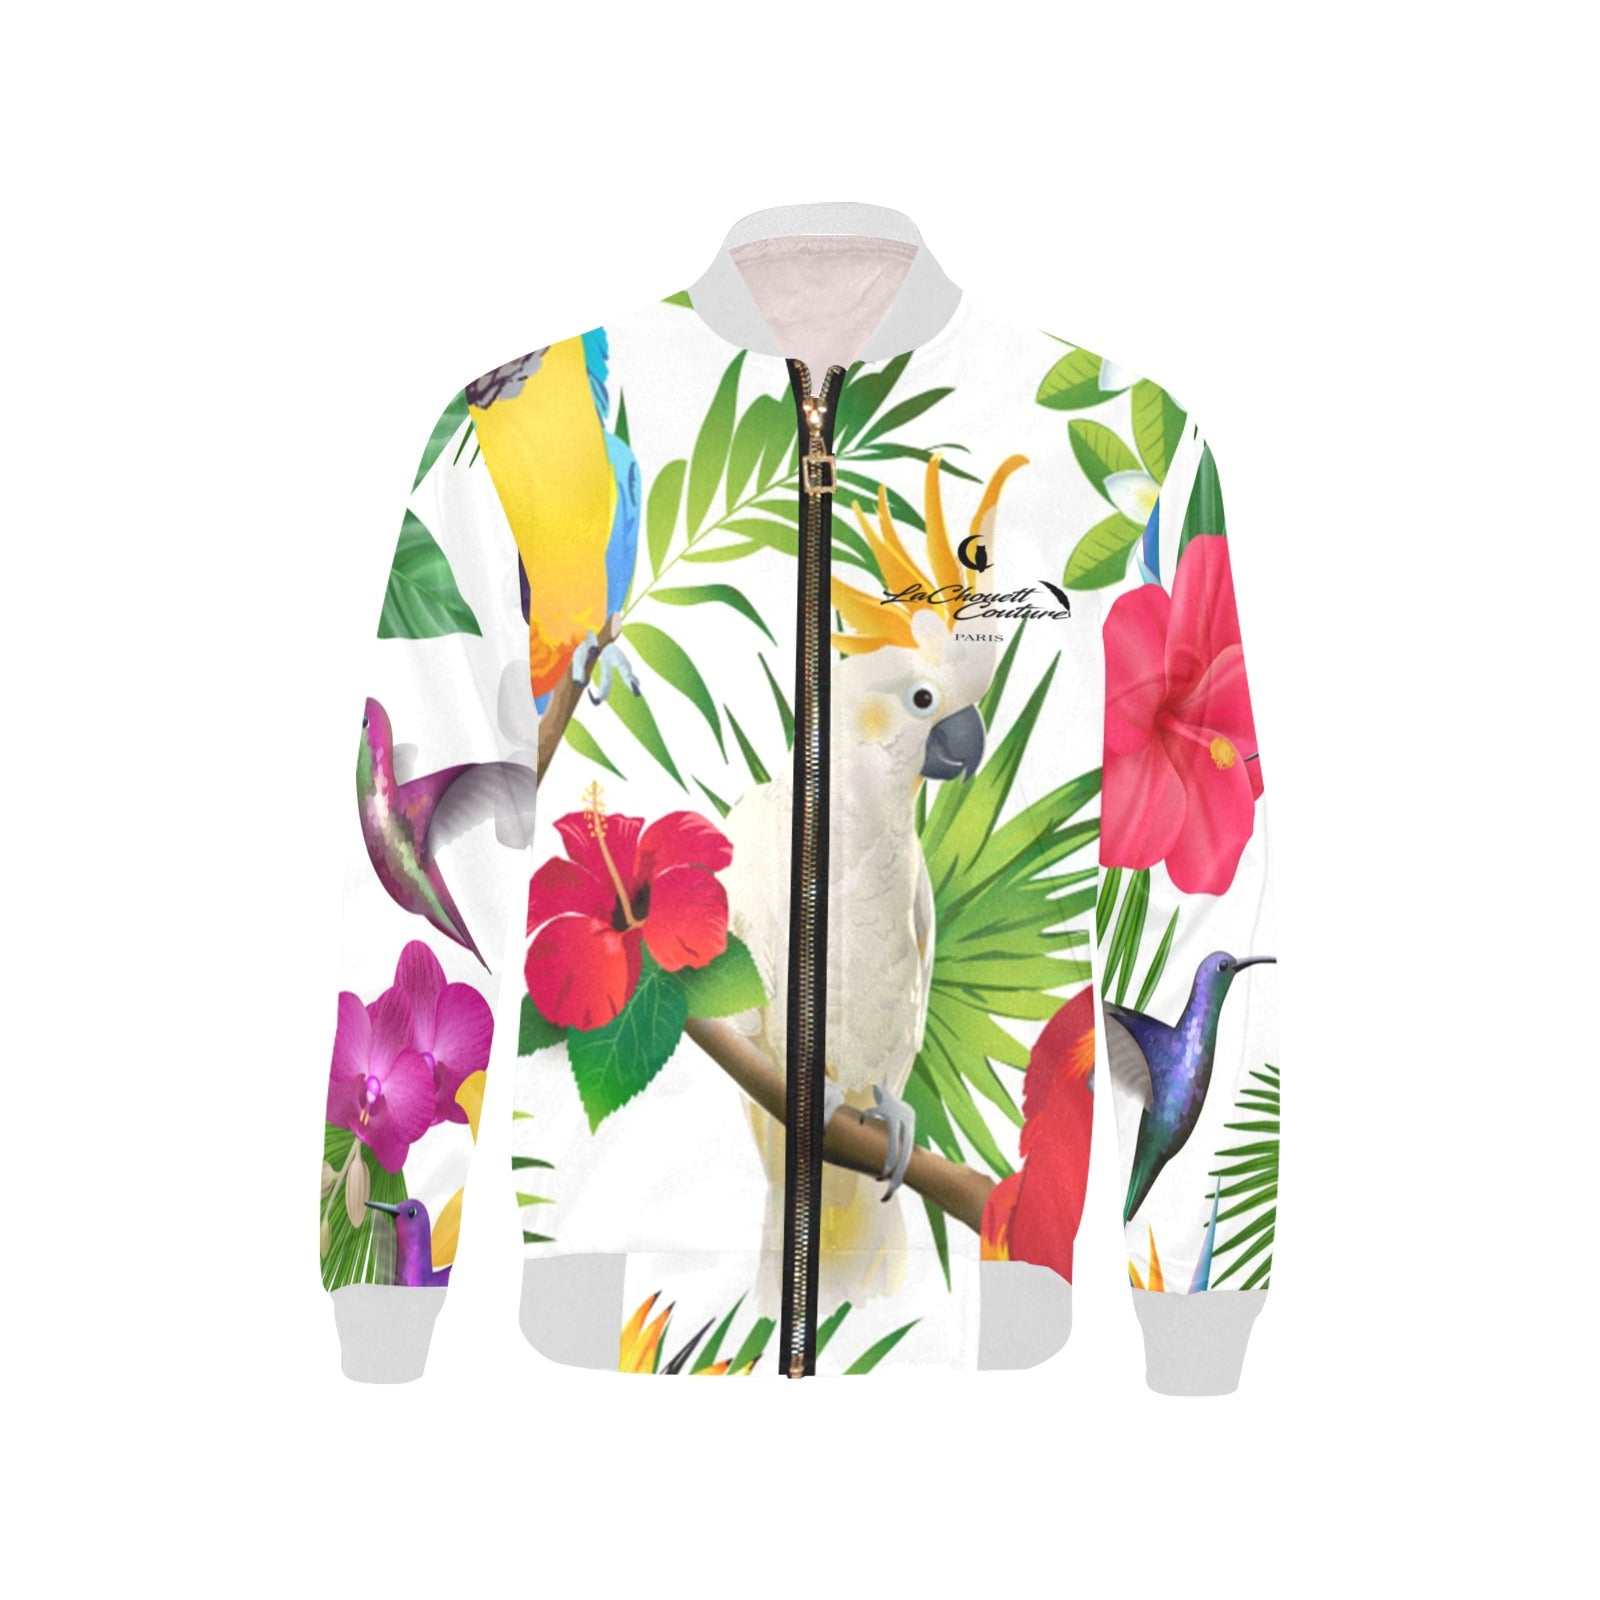 EXOTIC STYLE Kids' All Over Print Bomber Jacket